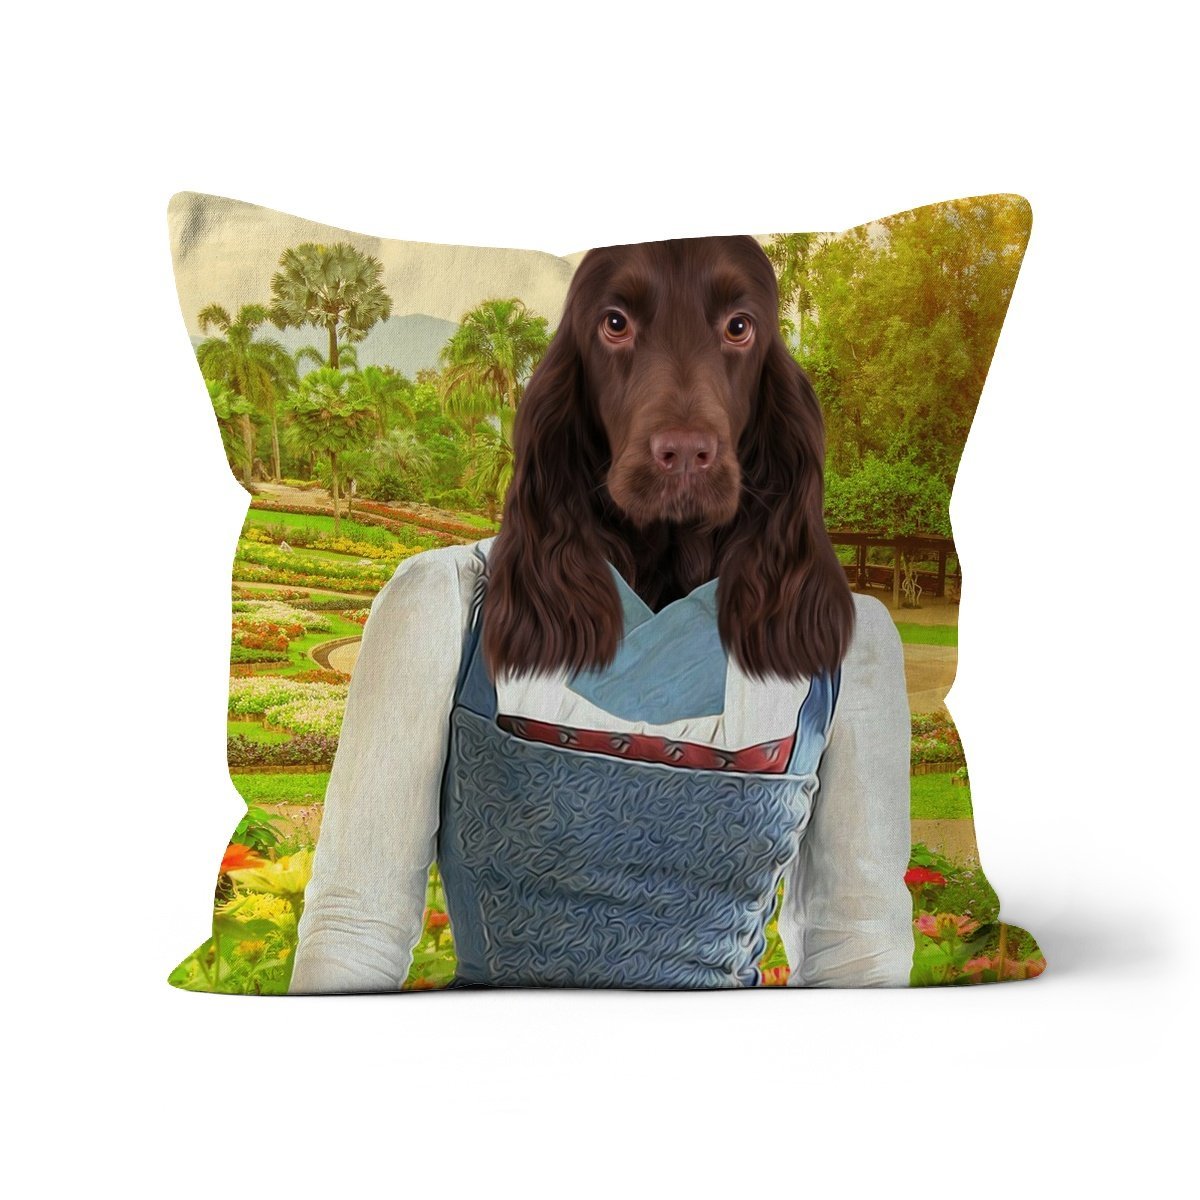 Belle (Beauty & The Beast Inspired): Custom Pet Cushion - Paw & Glory - #pet portraits# - #dog portraits# - #pet portraits uk#paw and glory, pet portraits cushion,pet face pillows, personalised pet pillows, pillows with dogs picture, custom pet pillows, pet print pillow